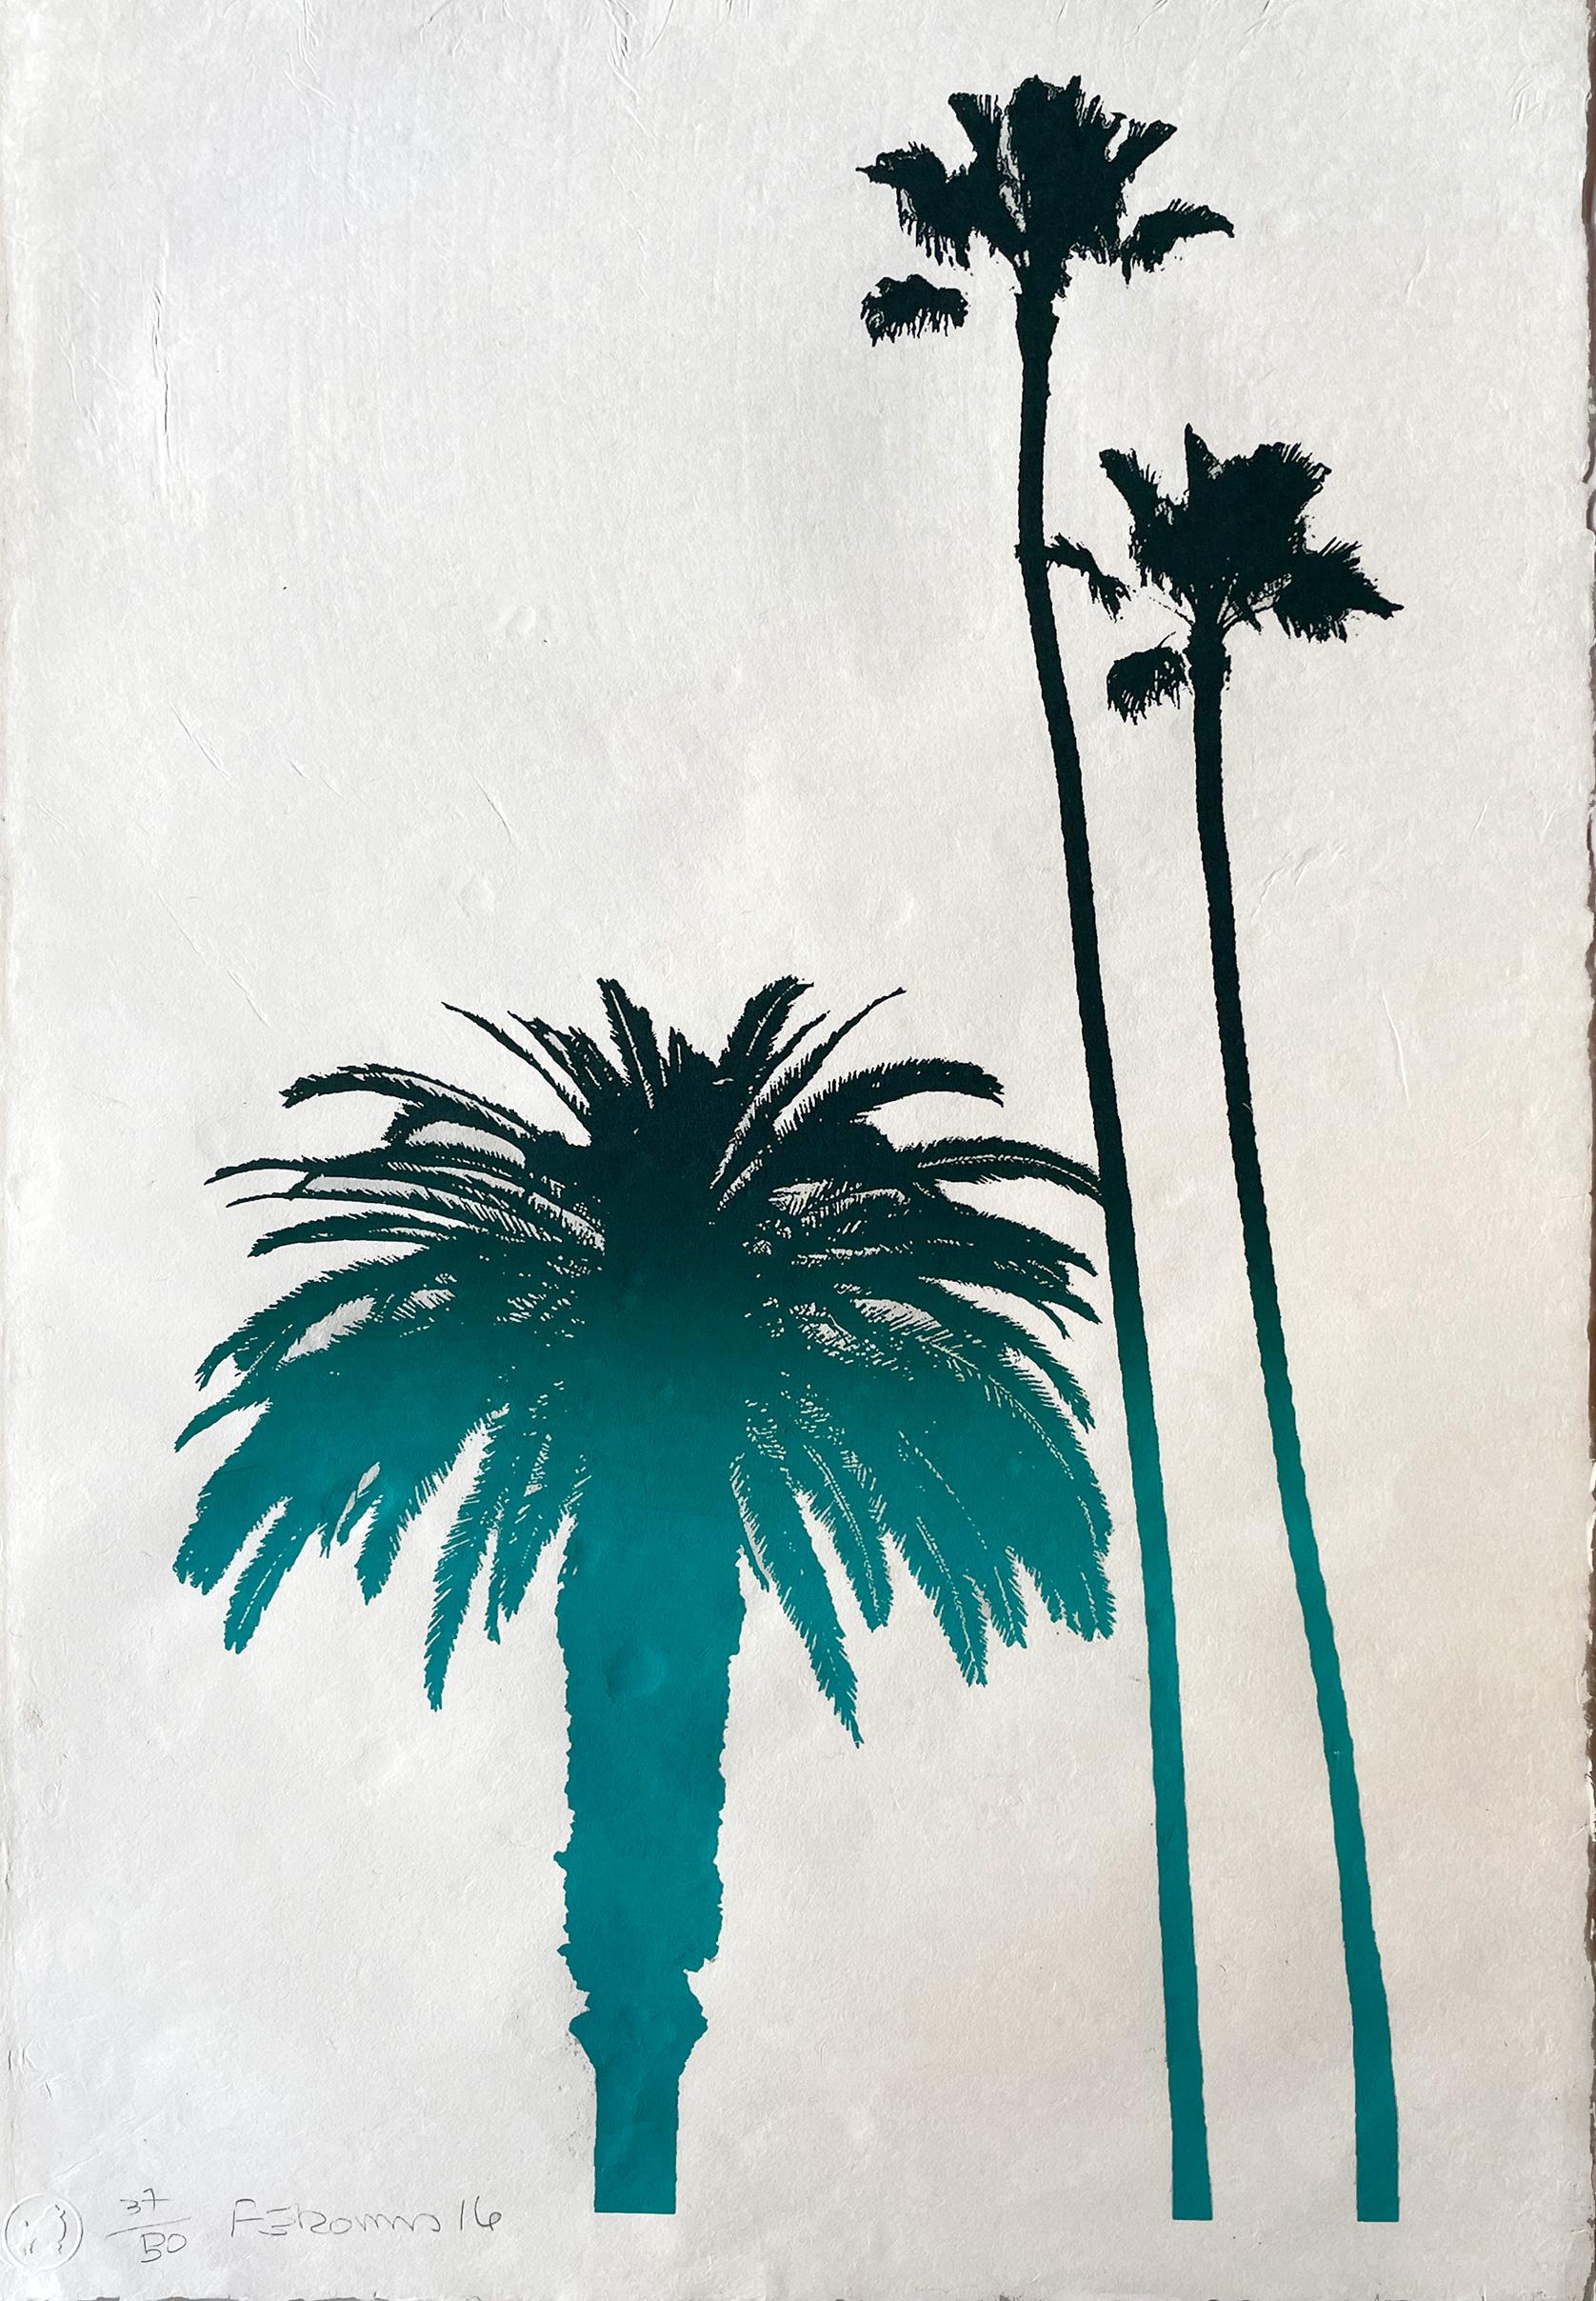 Frank Romero created this iconic print of California palm trees. Signed and numbered split color print  hand pulled by the artist, from the edition of 50.

Throughout his 40 year career as an artist, Frank Romero has been a dedicated member of the